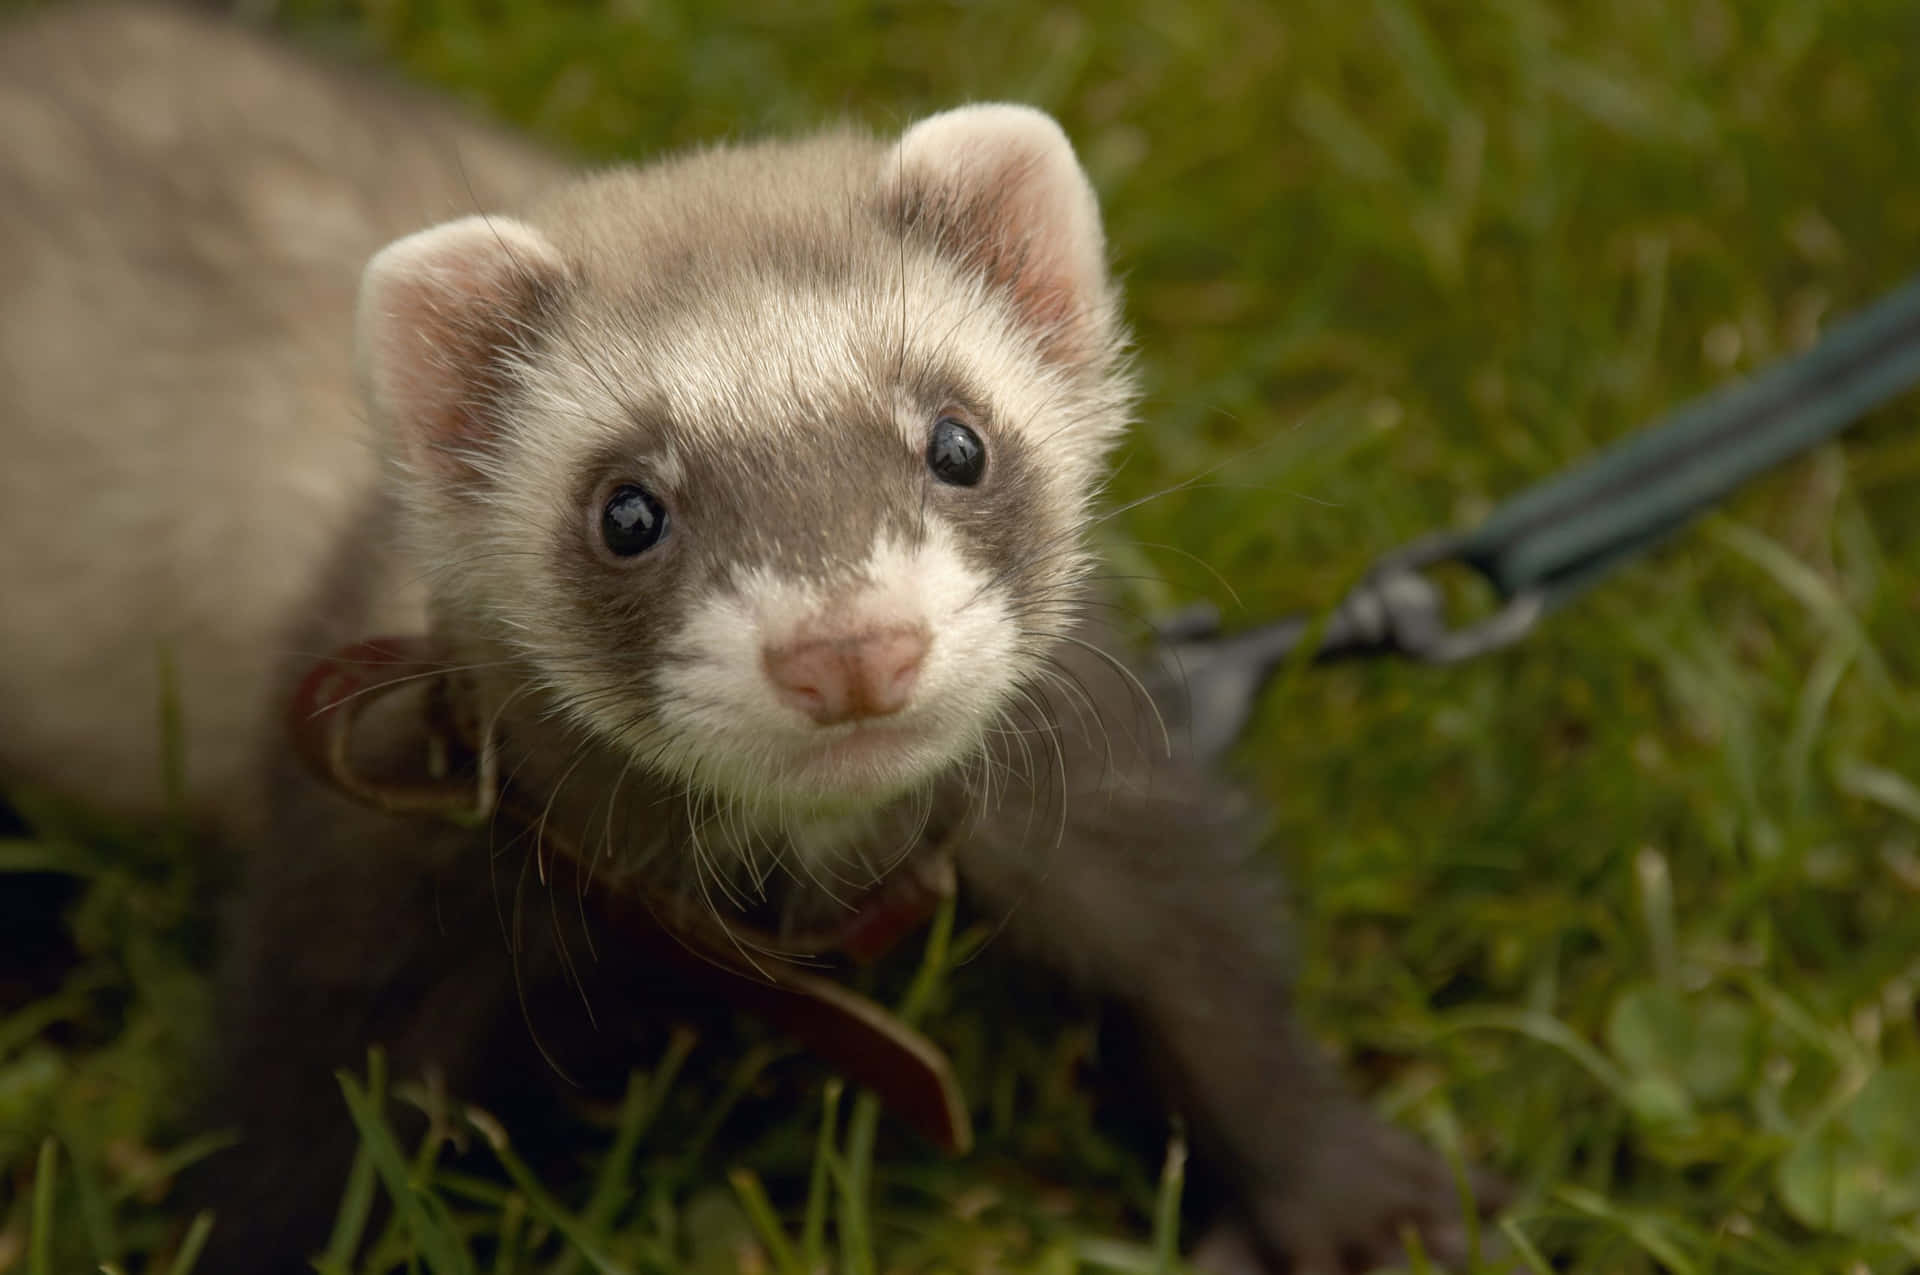 Enjoying a day of fun and play, this adorable ferret is sure to bring a smile to your face!